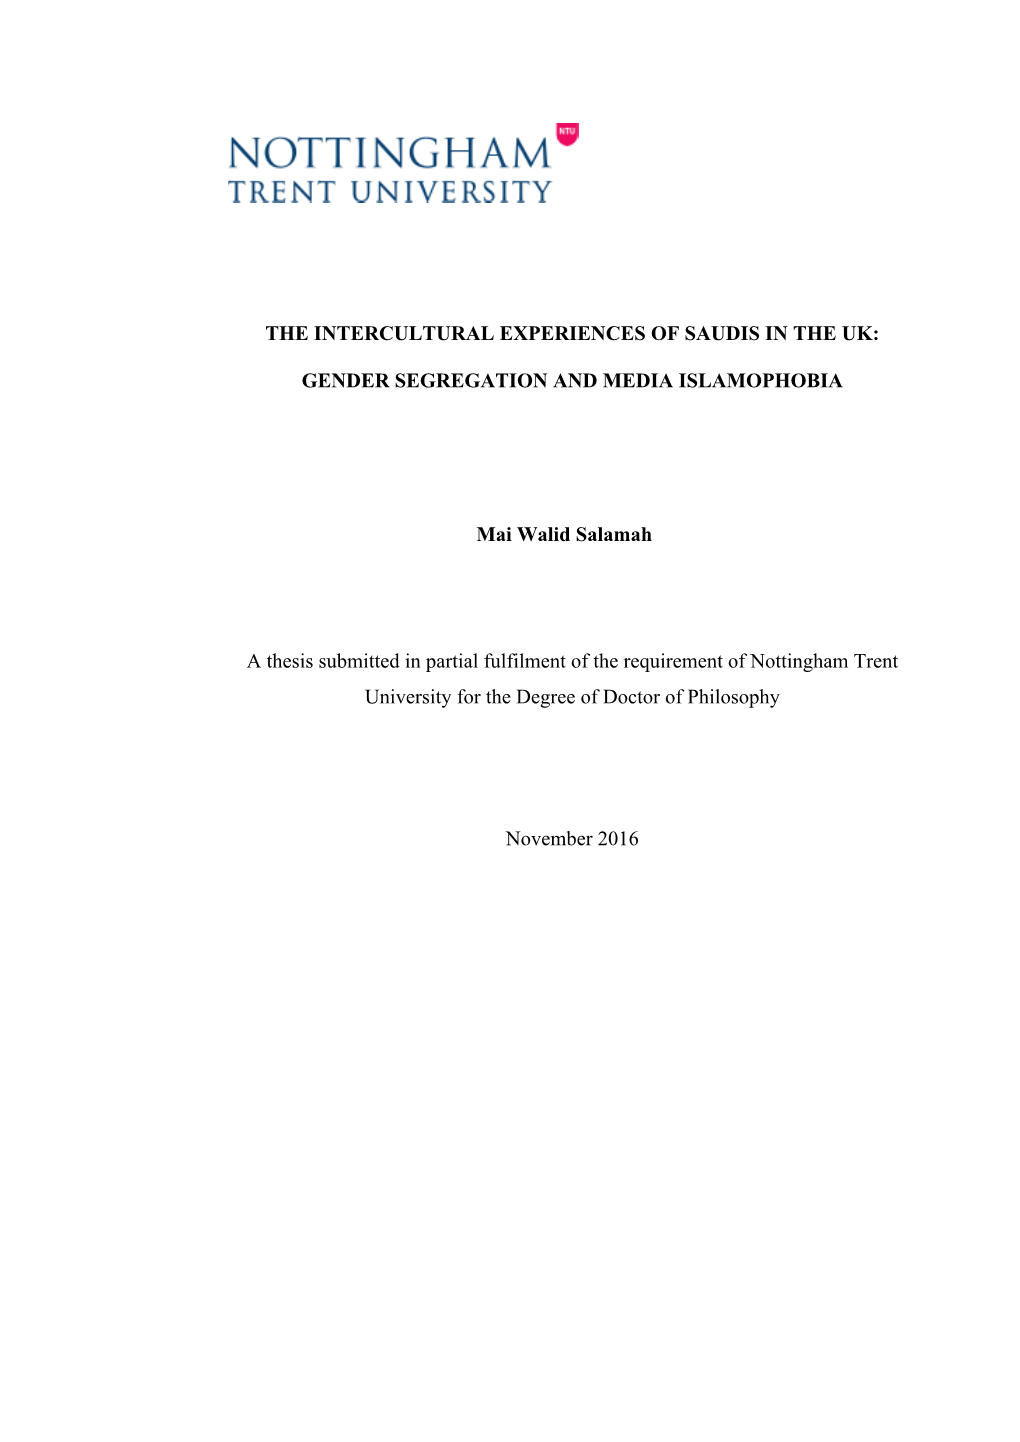 I the INTERCULTURAL EXPERIENCES of SAUDIS in the UK: GENDER SEGREGATION and MEDIA ISLAMOPHOBIA Mai Walid Salamah a Thesis Submit